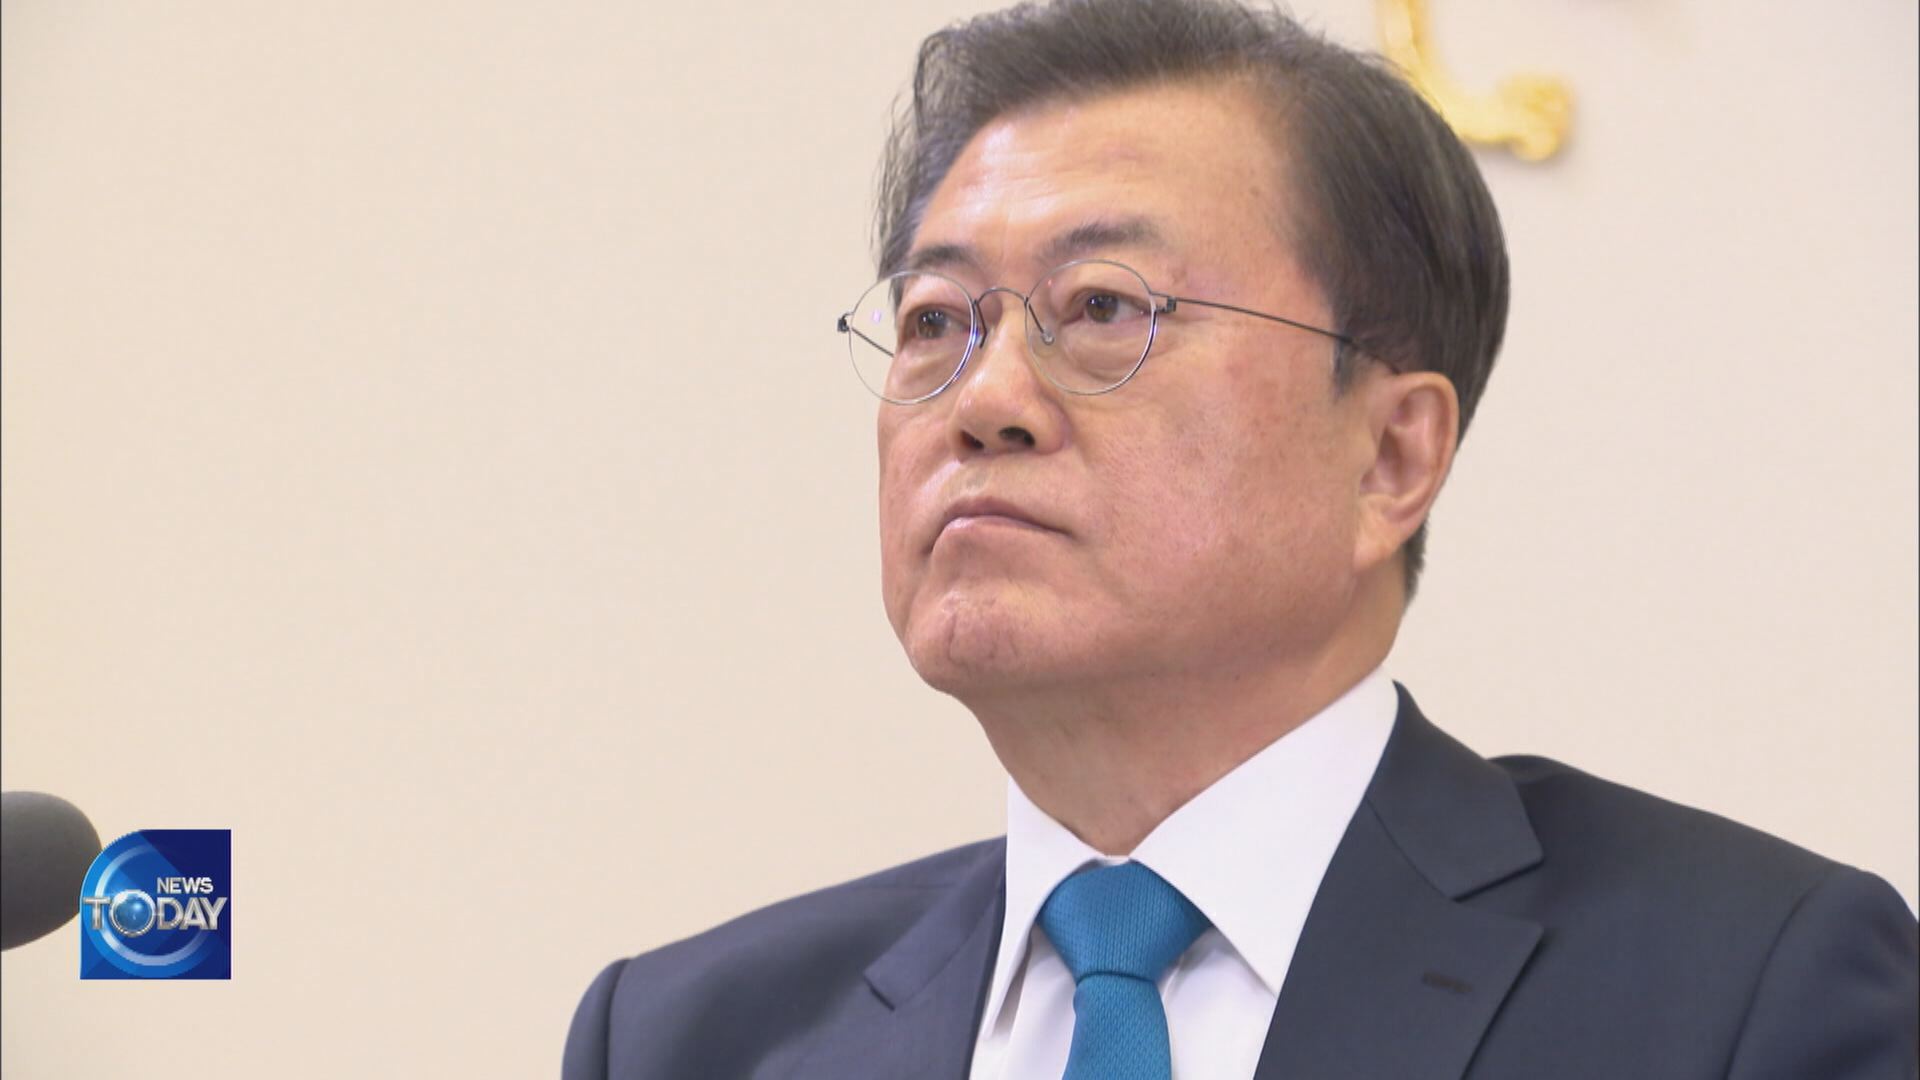 PRESIDENT MOON APPROVES SUSPENSION ON YOON